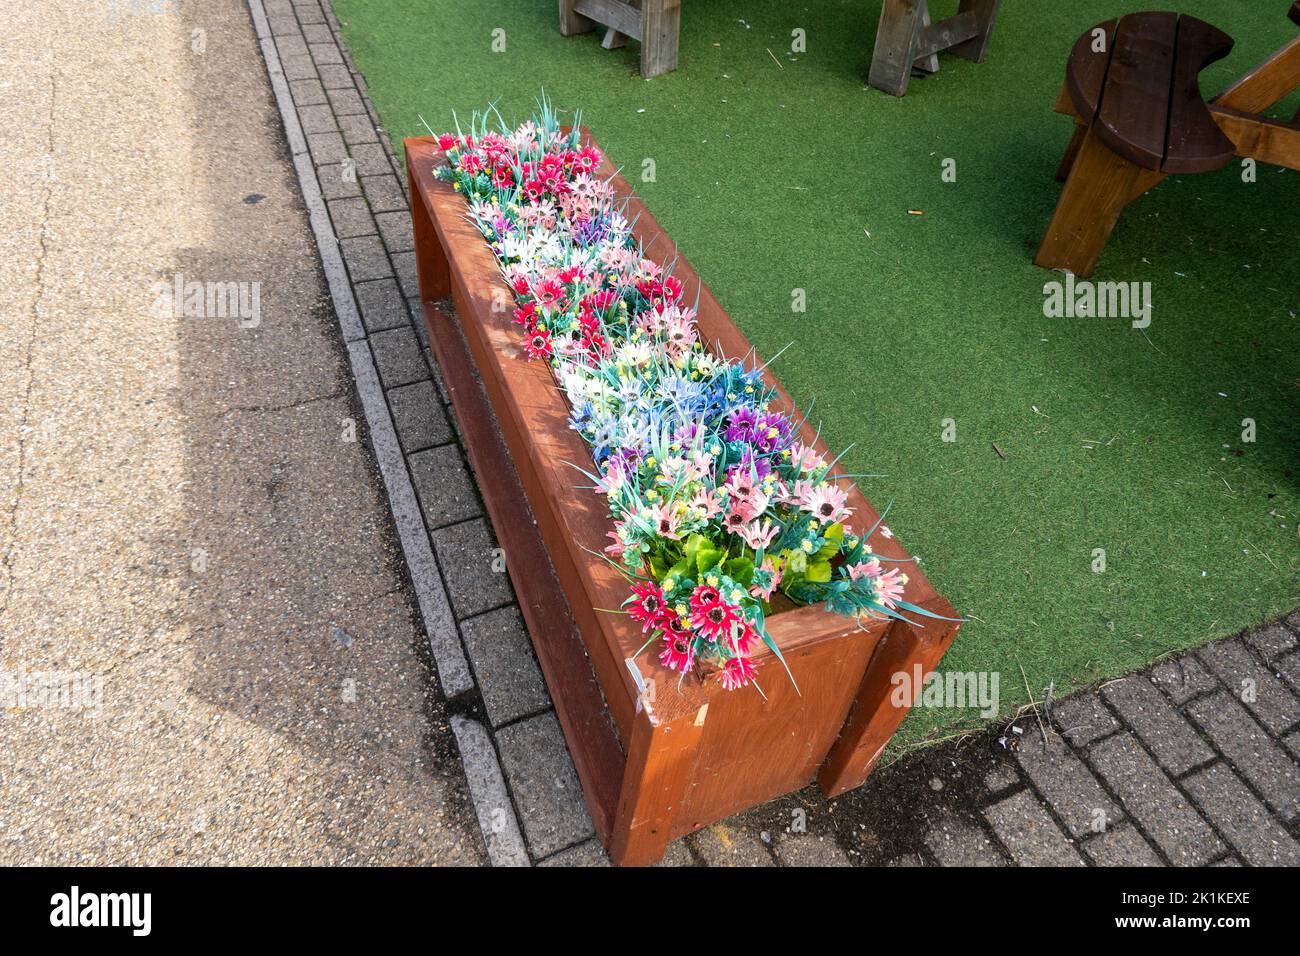 Raised wooden bed with plastic flowers made to look like real flowers in summertime Stock Photo